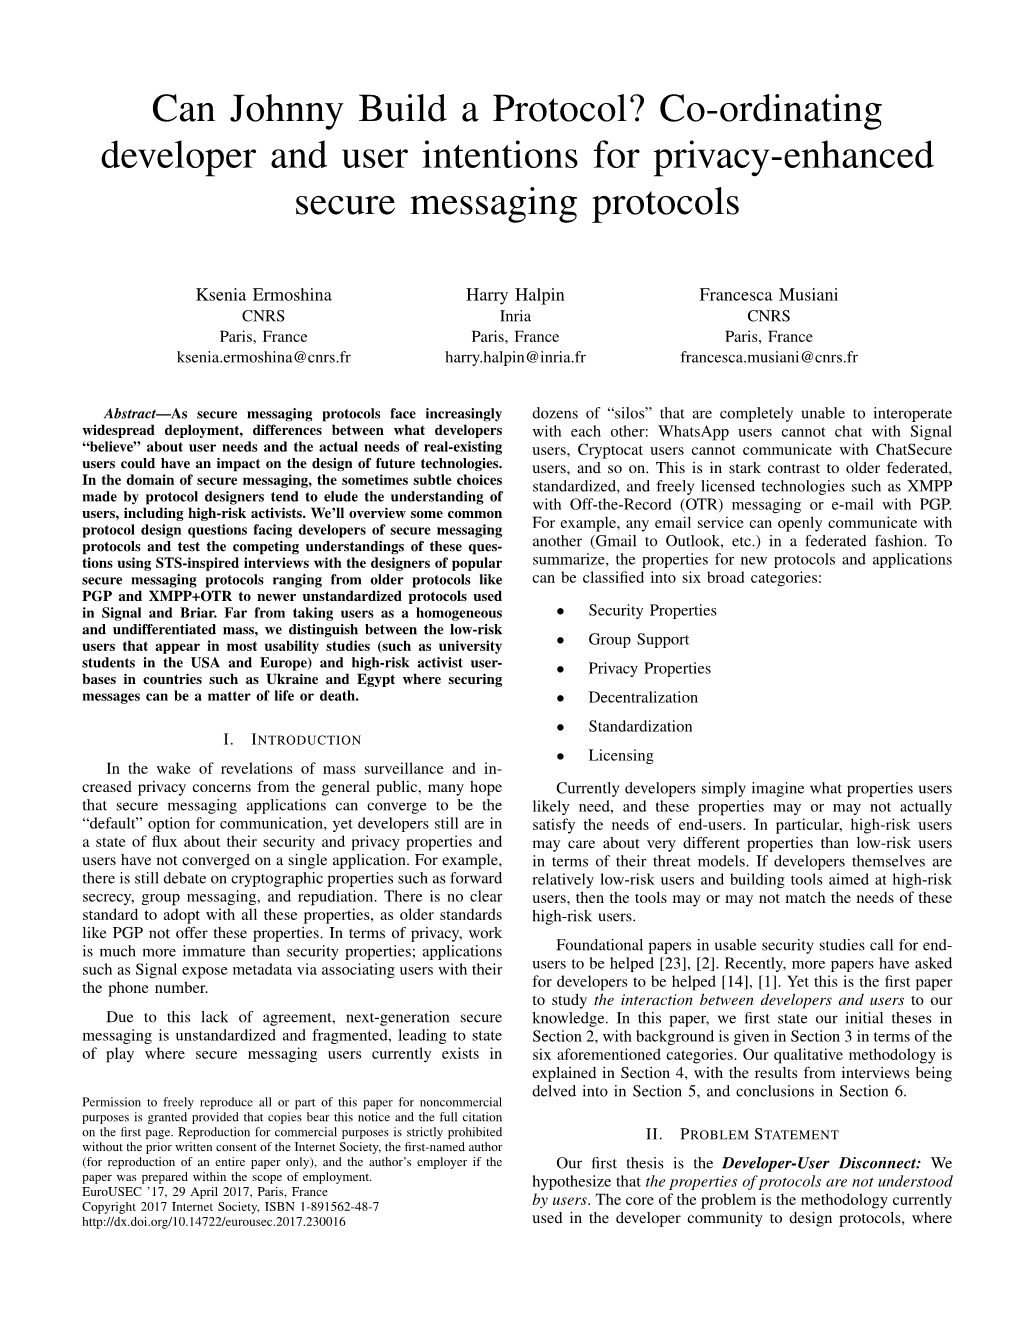 Can Johnny Build a Protocol? Co-Ordinating Developer and User Intentions for Privacy-Enhanced Secure Messaging Protocols